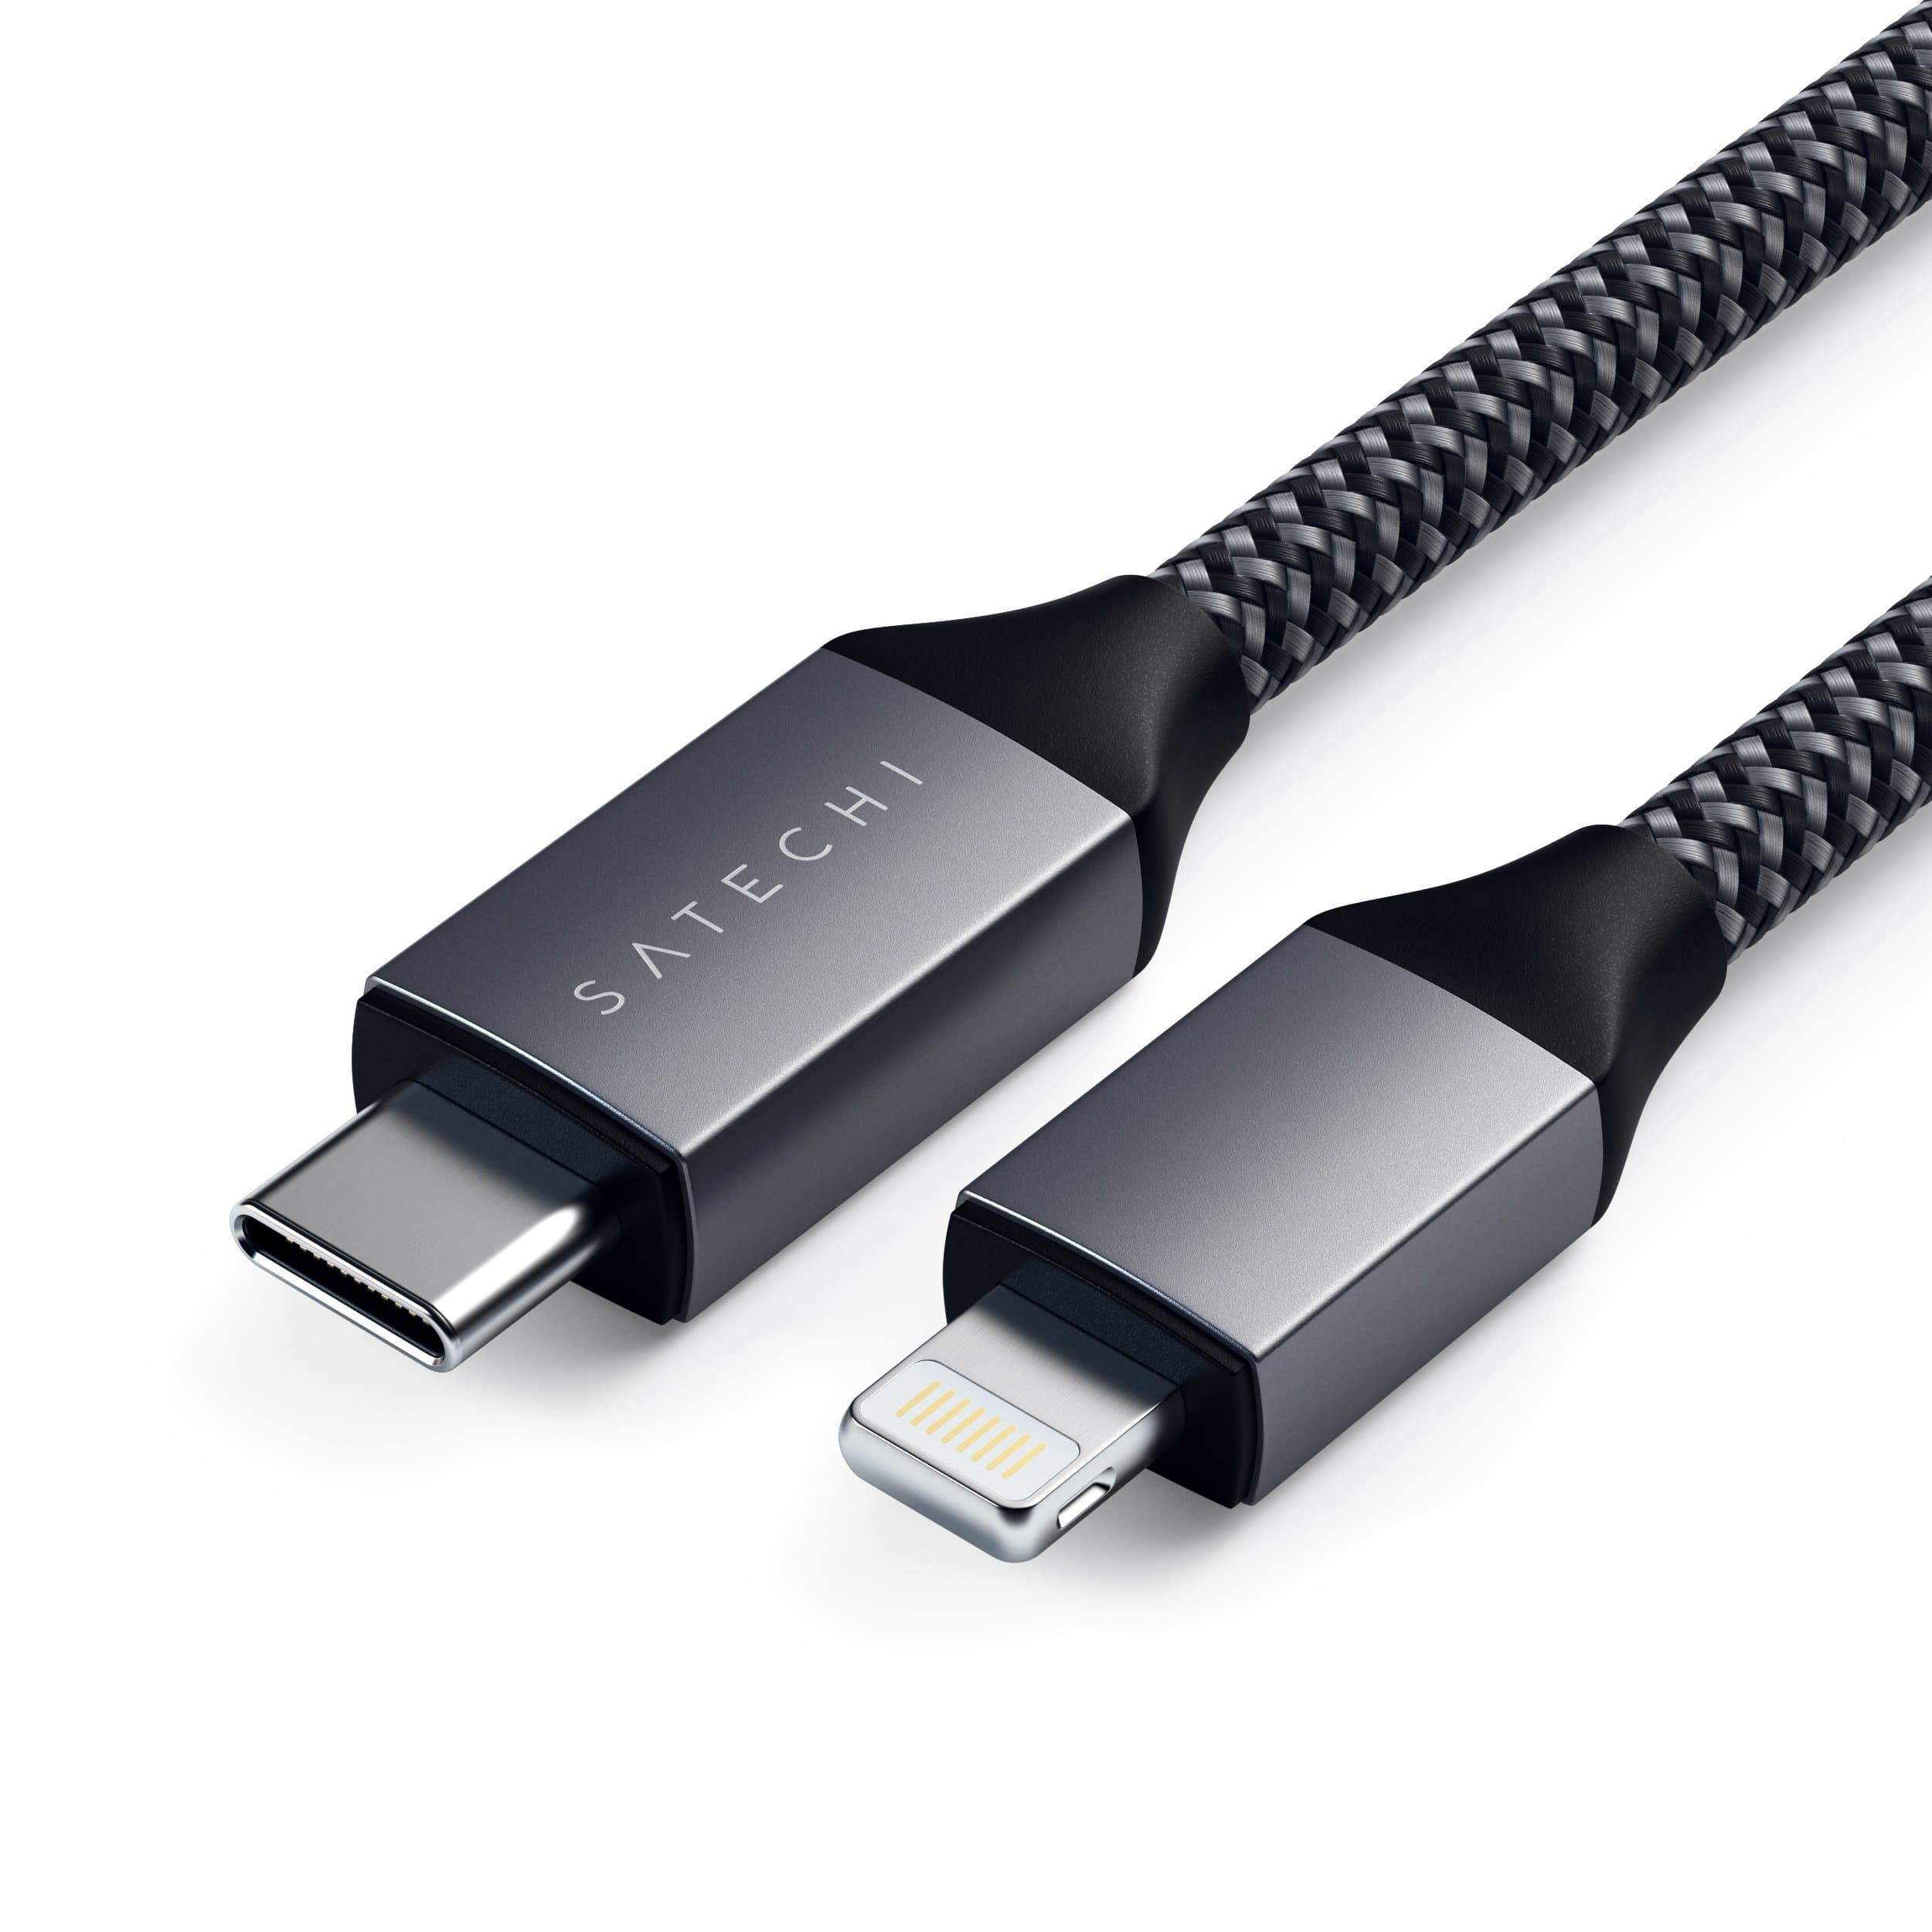 USB-C to Lightning Cable - Apple MFi Certified Cables Satechi 